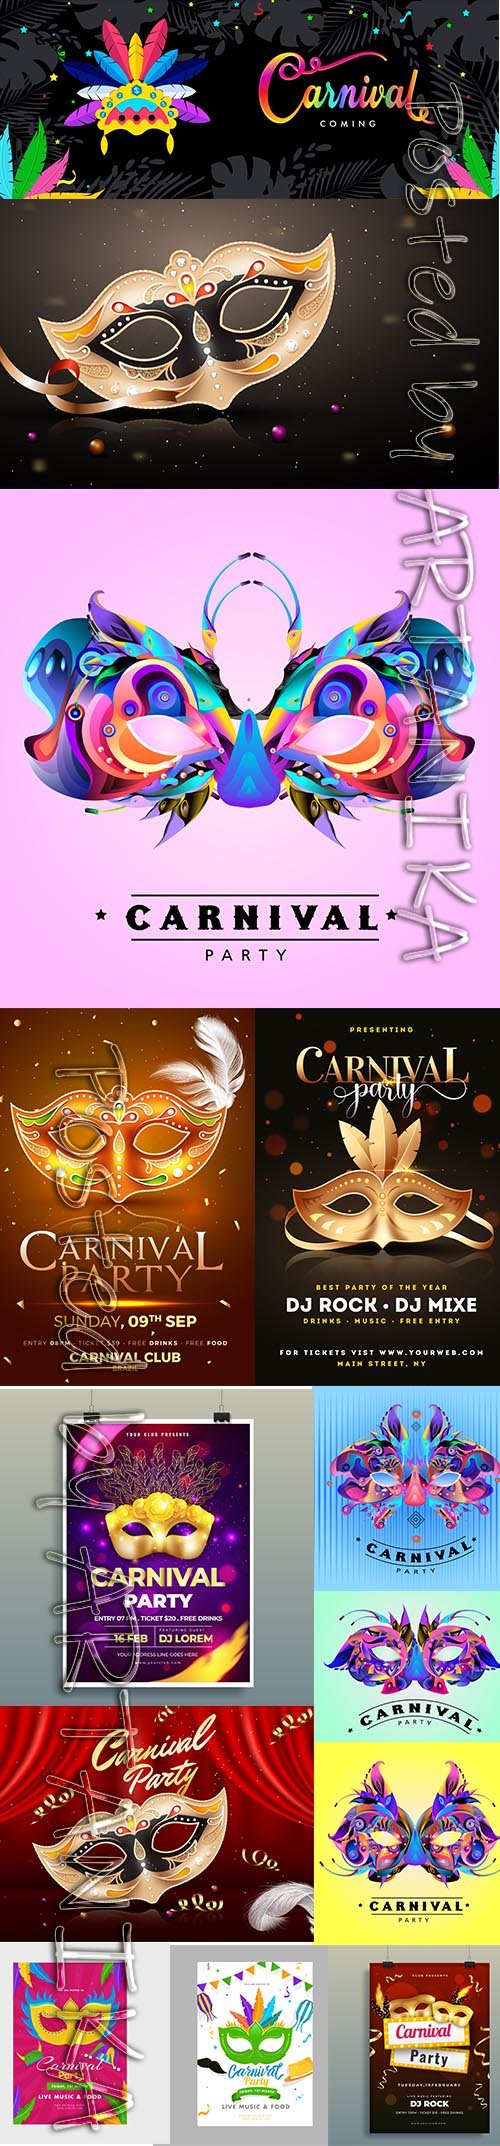 Mardi Gras Carnival Party Background Pack Vol 4